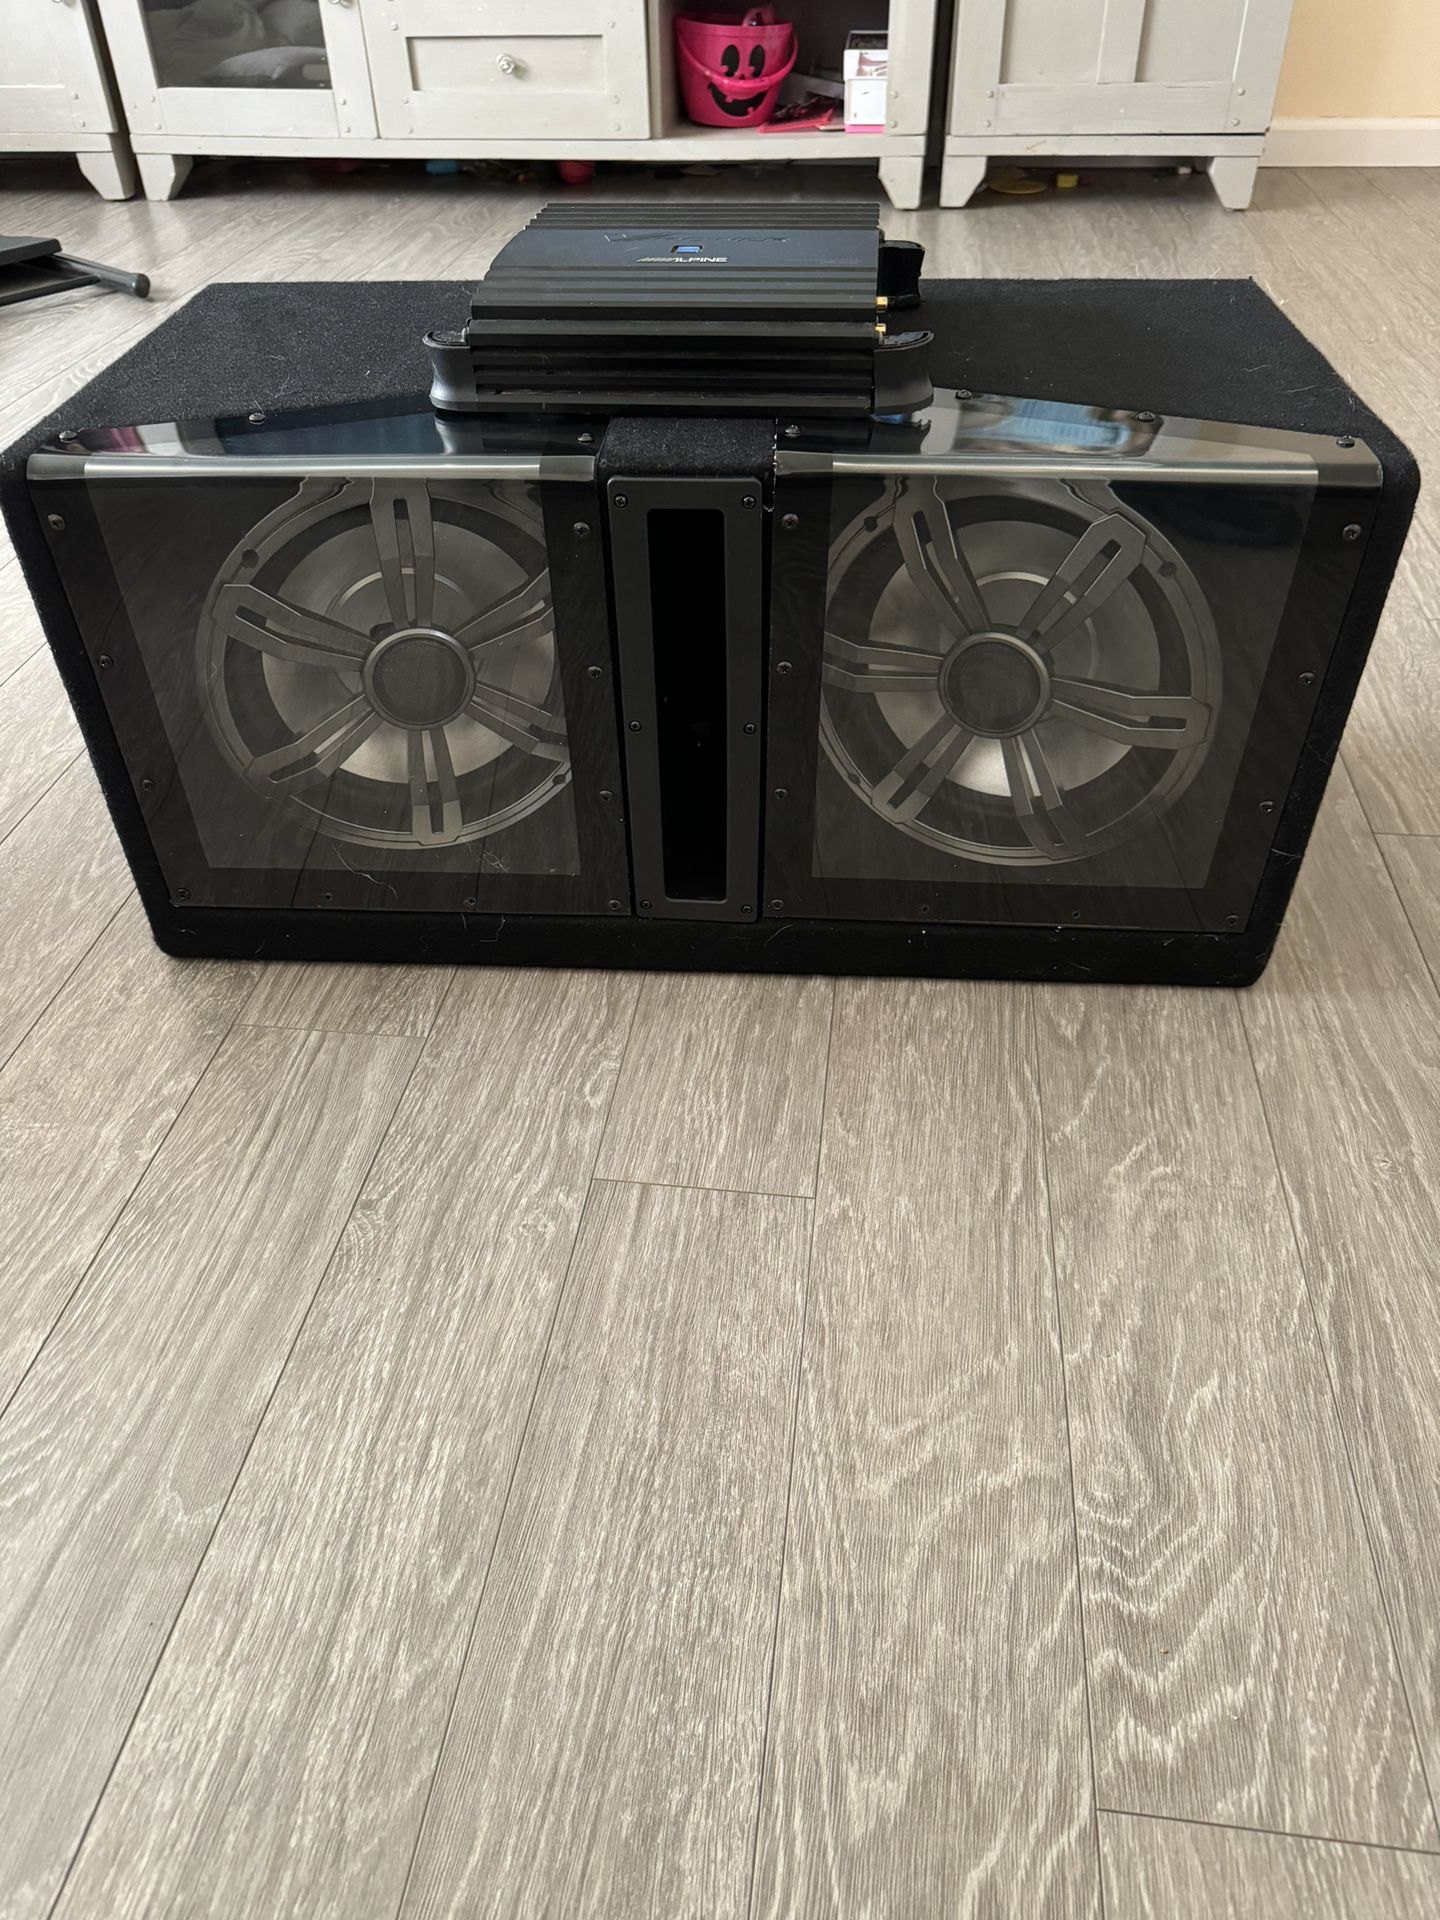 Dual 10in Subwoofers